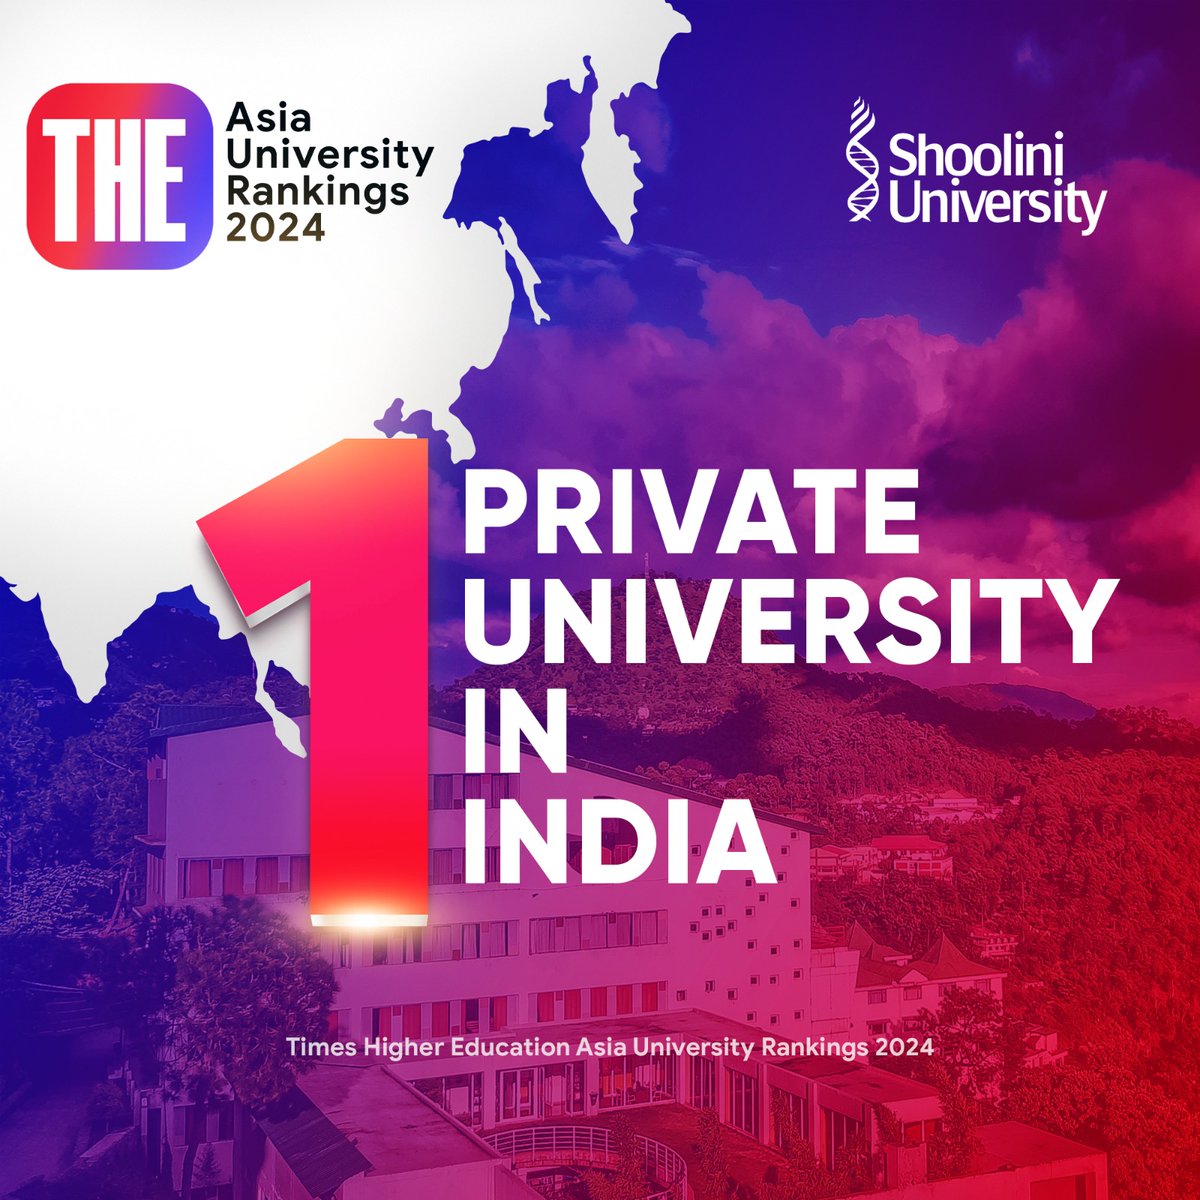 Shoolini is on a roll... Not only did we just secure an impressive 150th rank in the Times Higher Education Asia University Rankings 2024, but we have also cemented our position as the No.1 Private University in India.

#ShooliniUniversity #TopUniversity #THEAsiaRankings2024